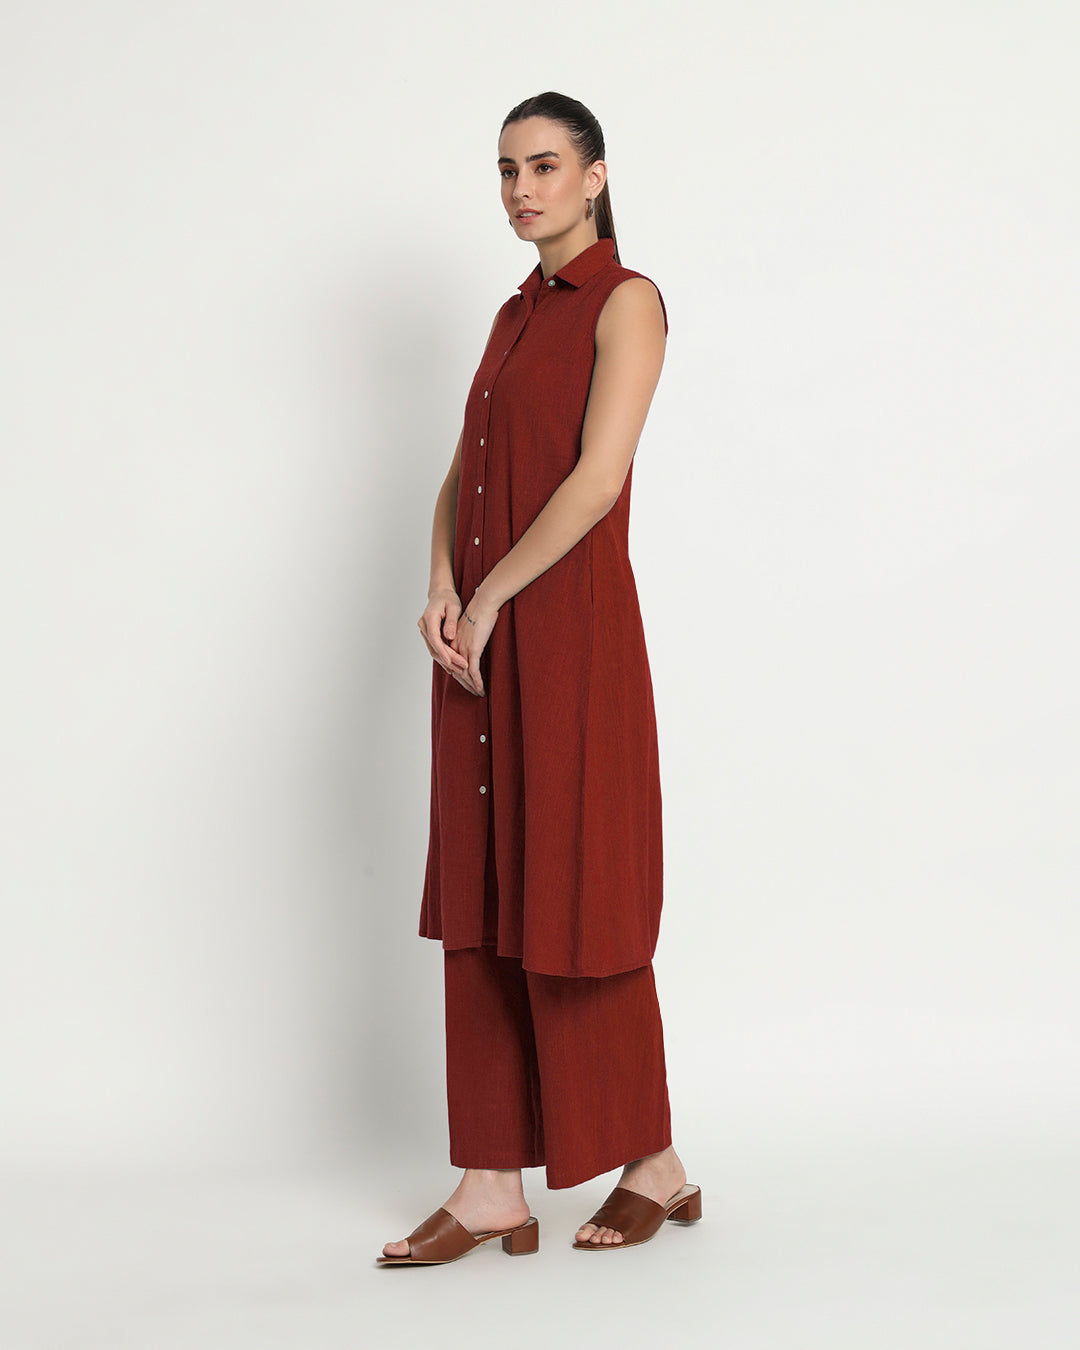 Russet Red Artful A-Line Solid Co-ord Set